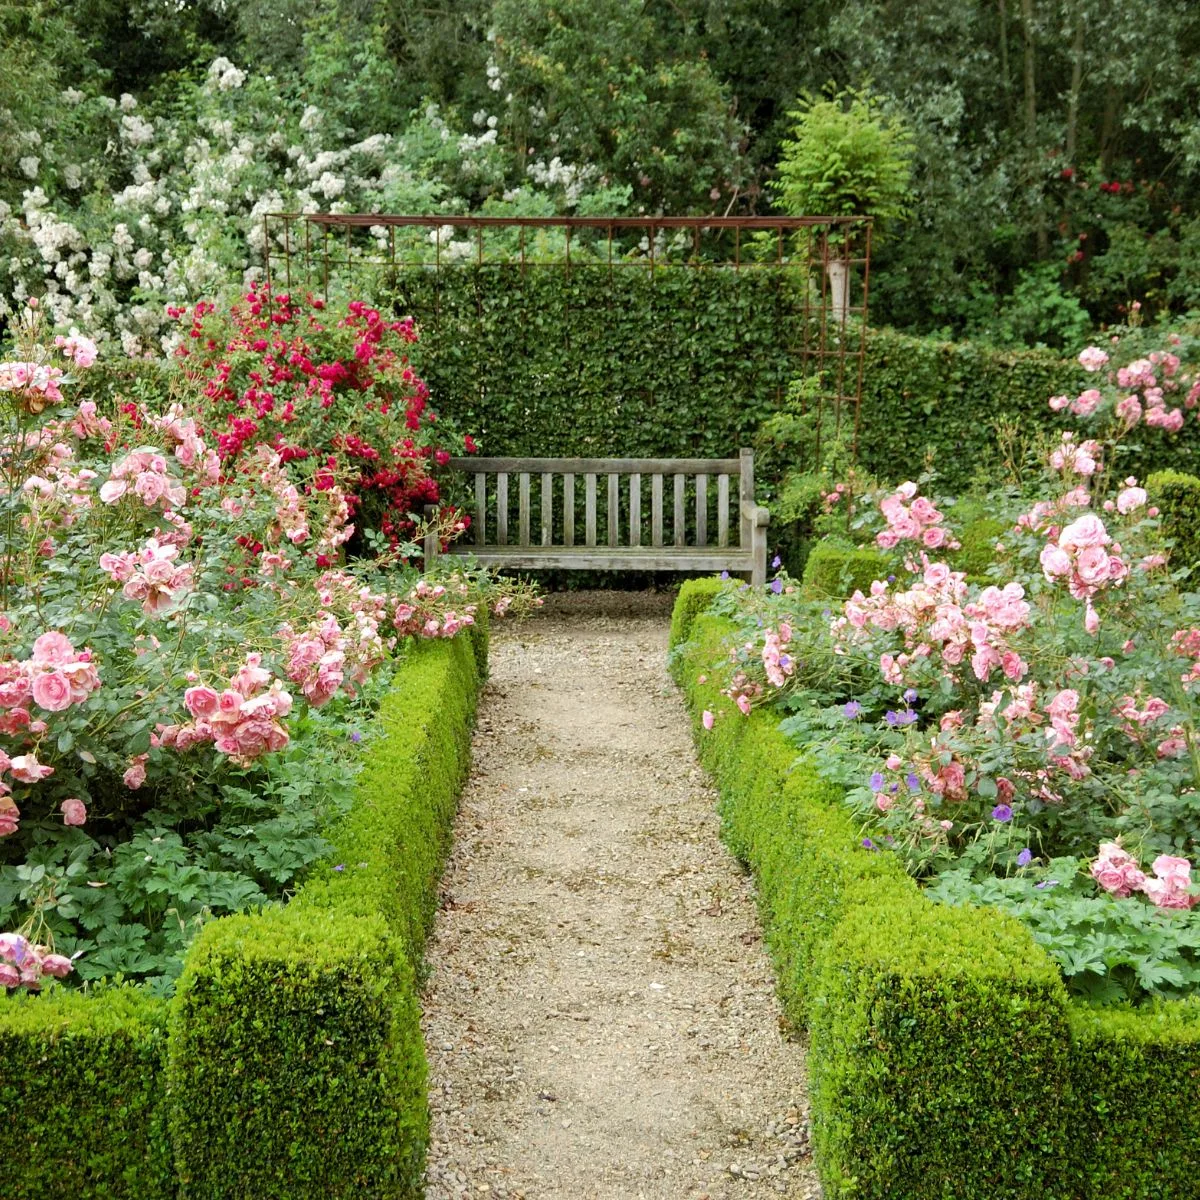 A bench in the middle of a formal rose garden, that contains green hedges.